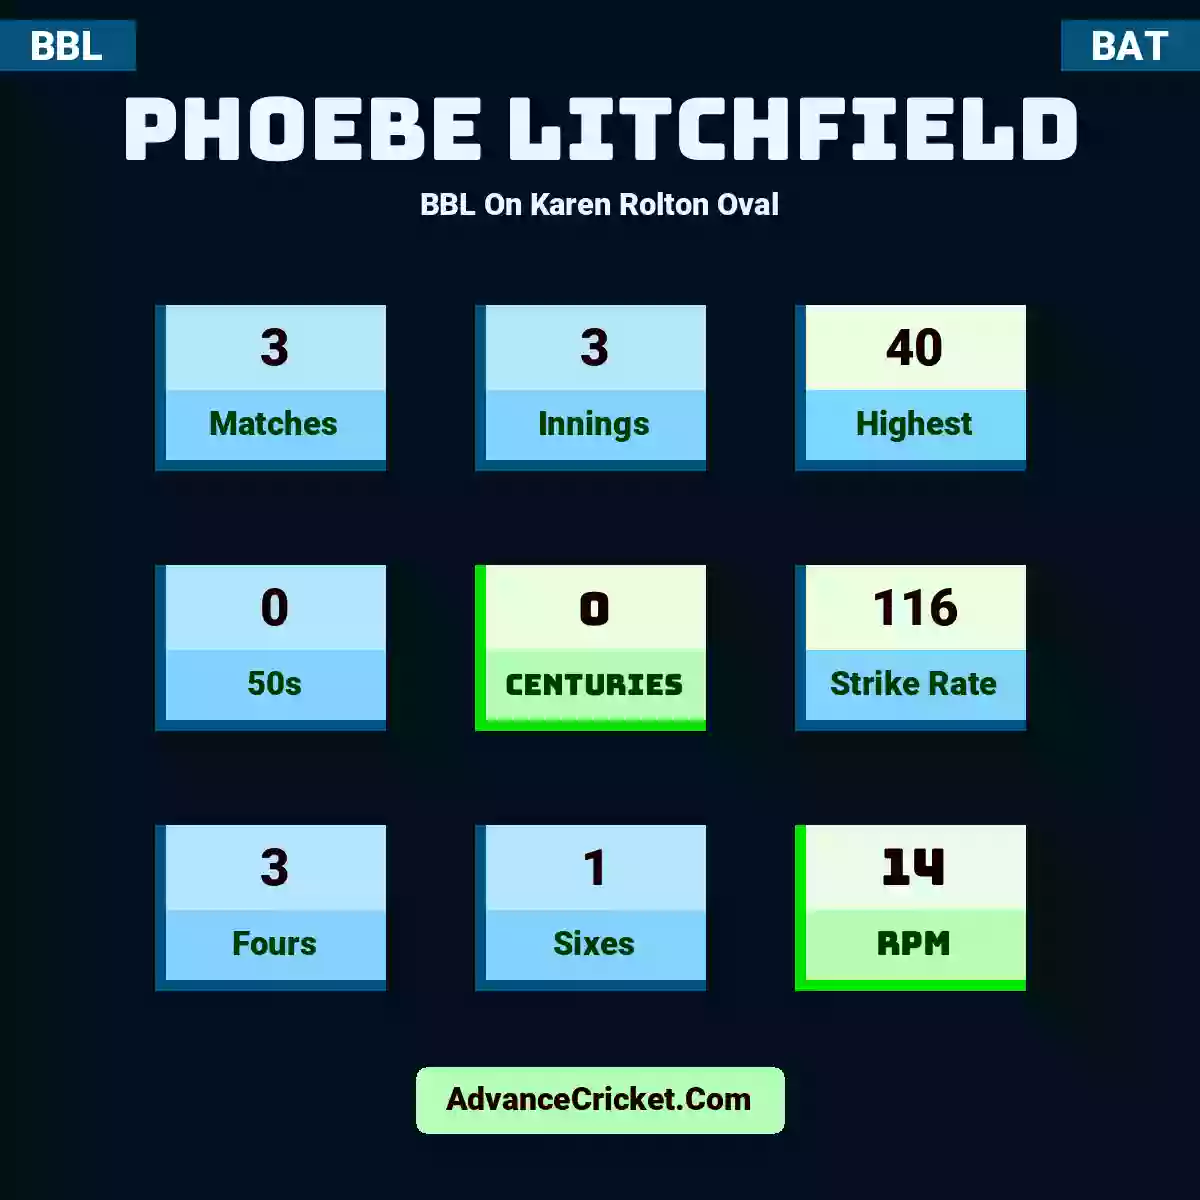 Phoebe Litchfield BBL  On Karen Rolton Oval, Phoebe Litchfield played 3 matches, scored 40 runs as highest, 0 half-centuries, and 0 centuries, with a strike rate of 116. P.Litchfield hit 3 fours and 1 sixes, with an RPM of 14.